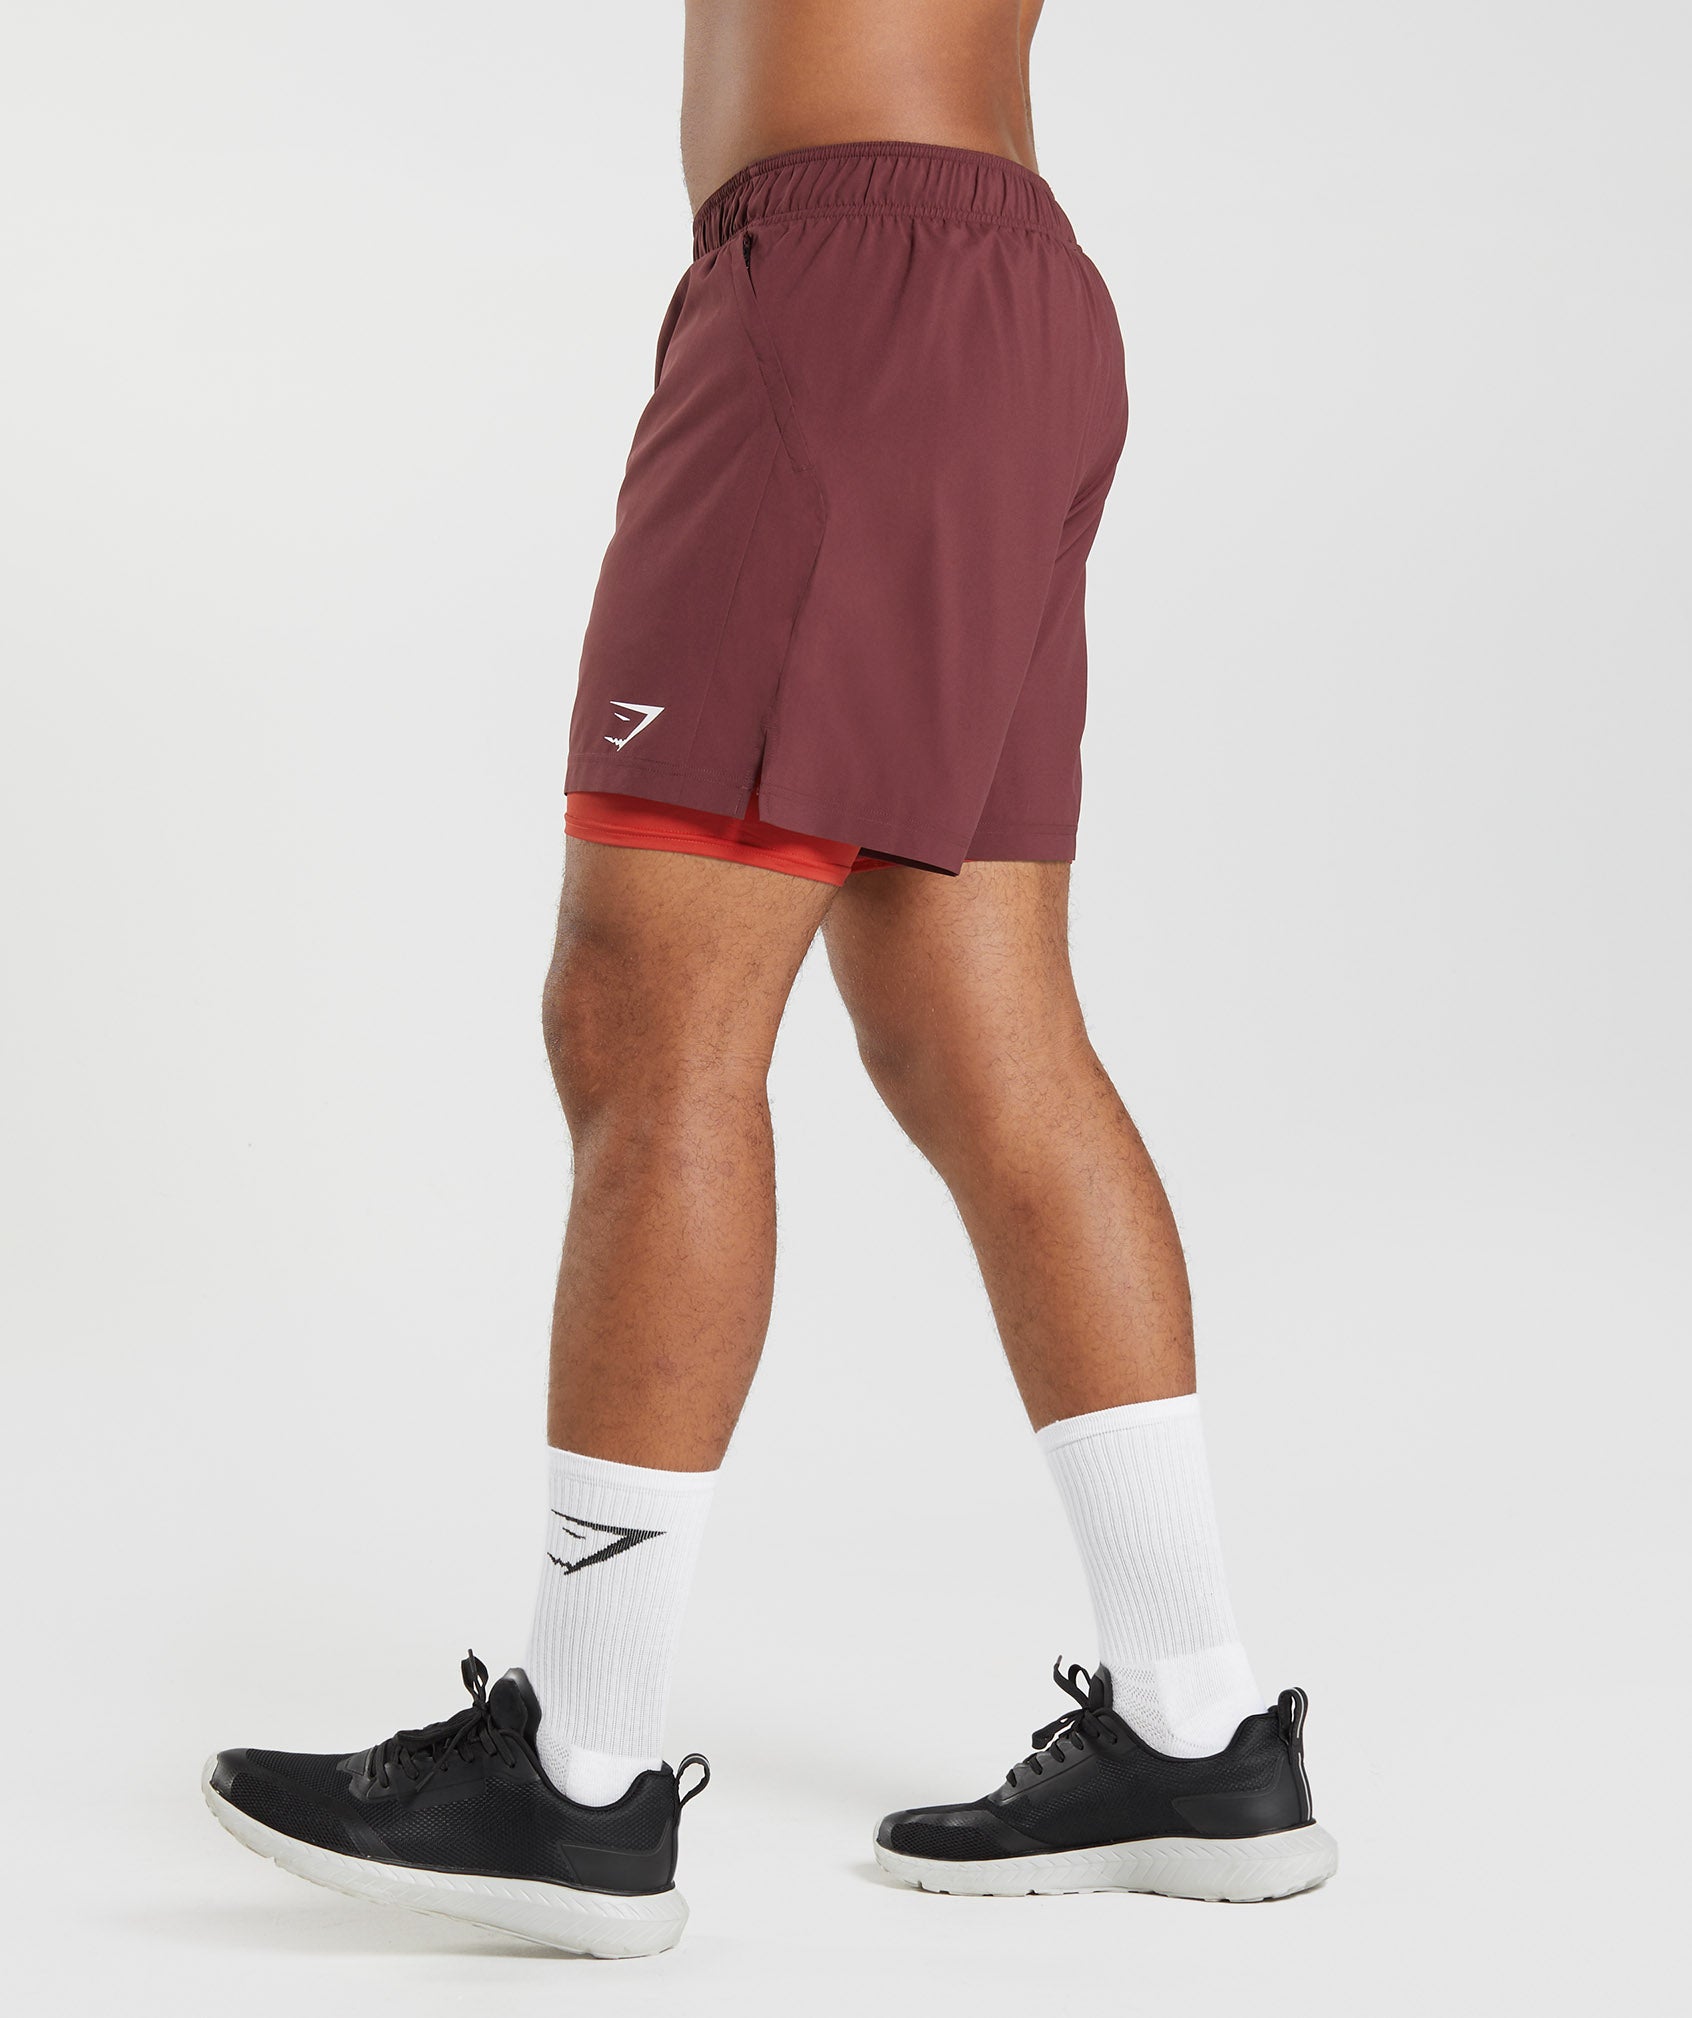 Sport 7" 2 In 1 Shorts in Baked Maroon/Salsa Red - view 3